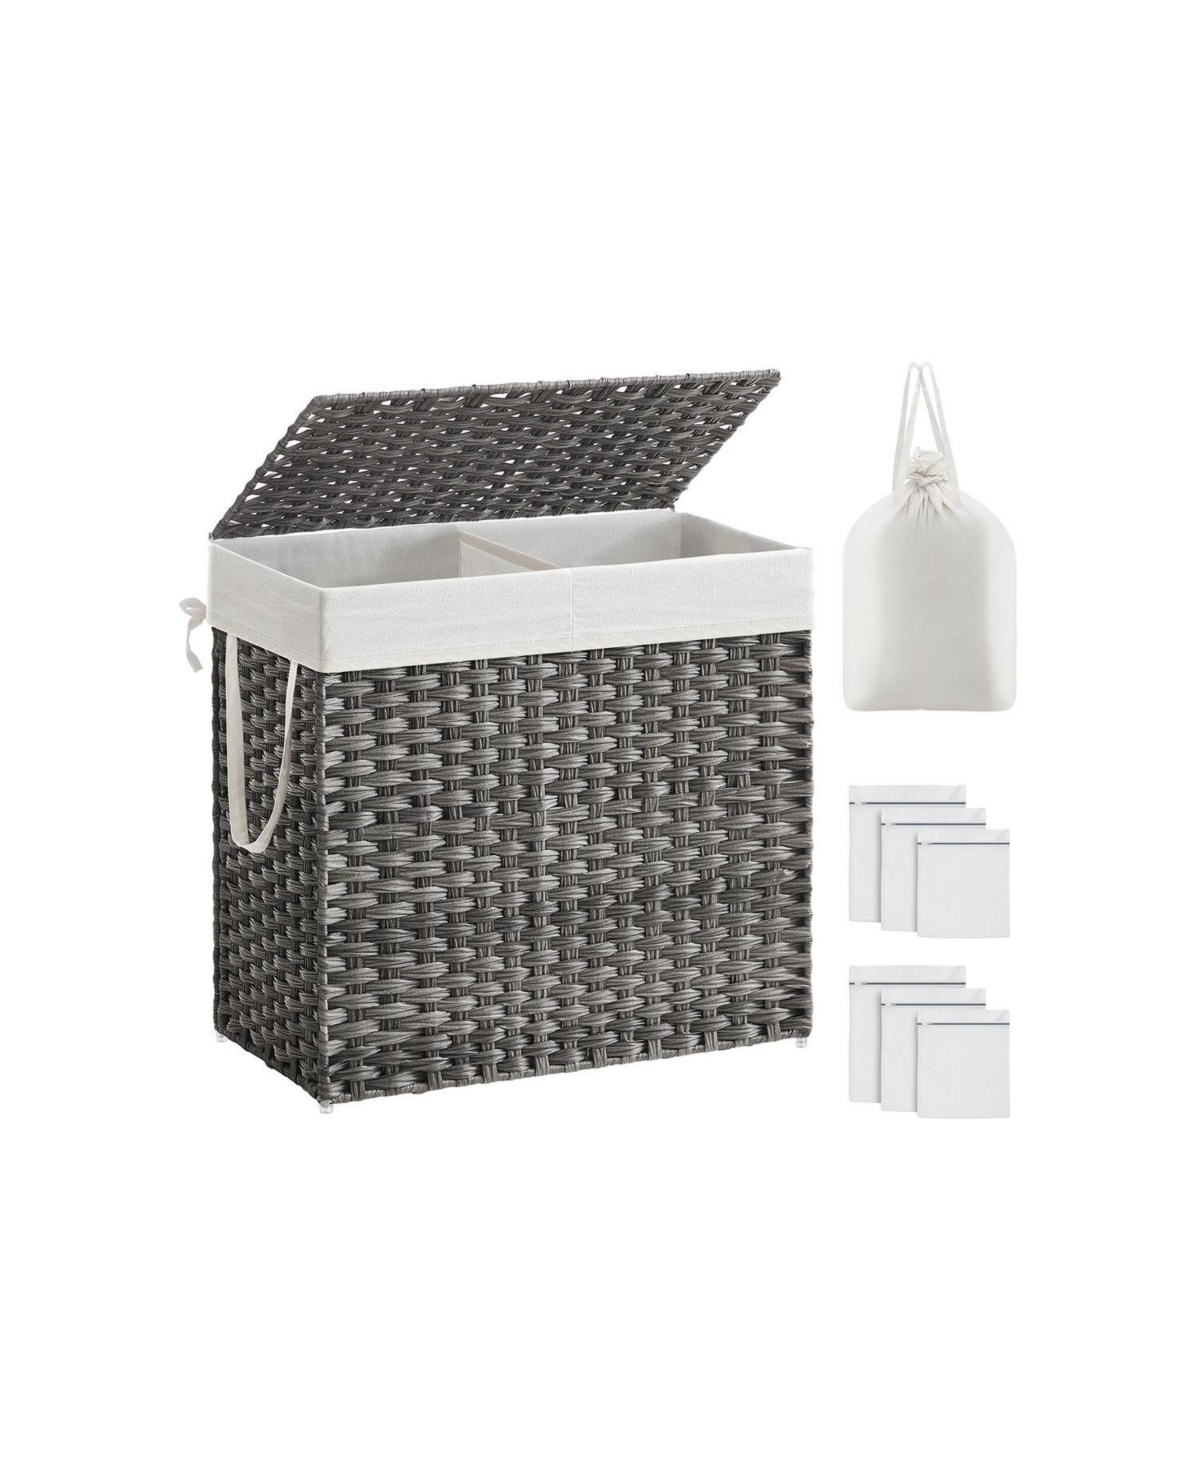 Synthetic Rattan Laundry Hamper with Lid, 2 Sections Removable Liner Bag - Grey